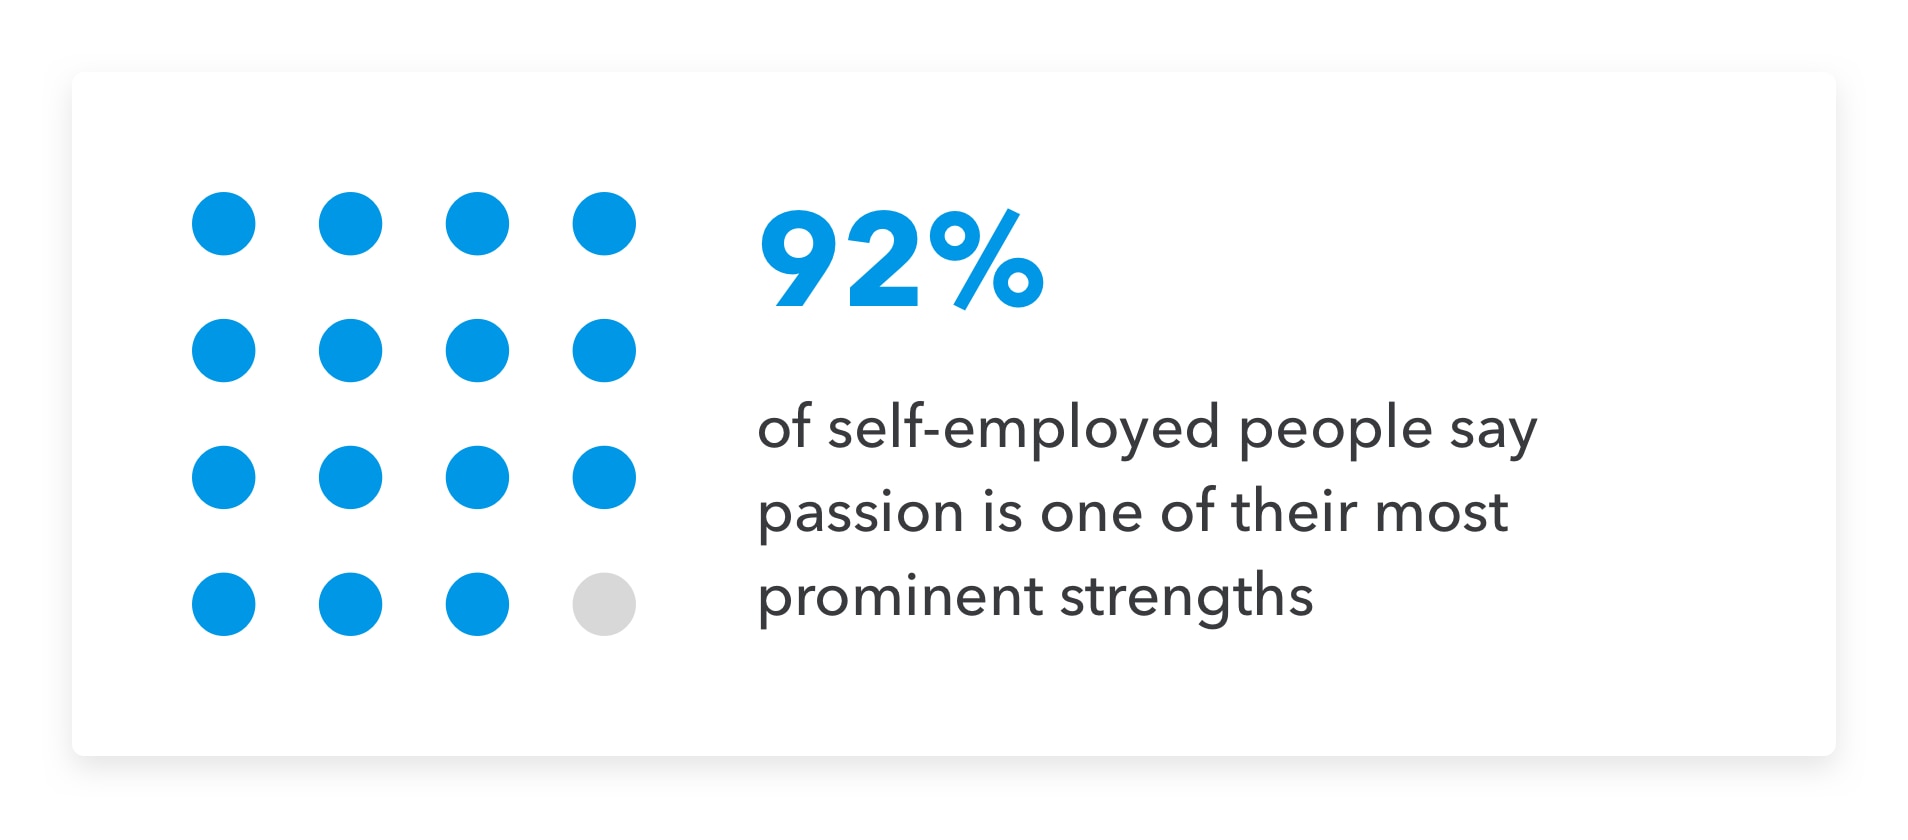 Data about self-employment.